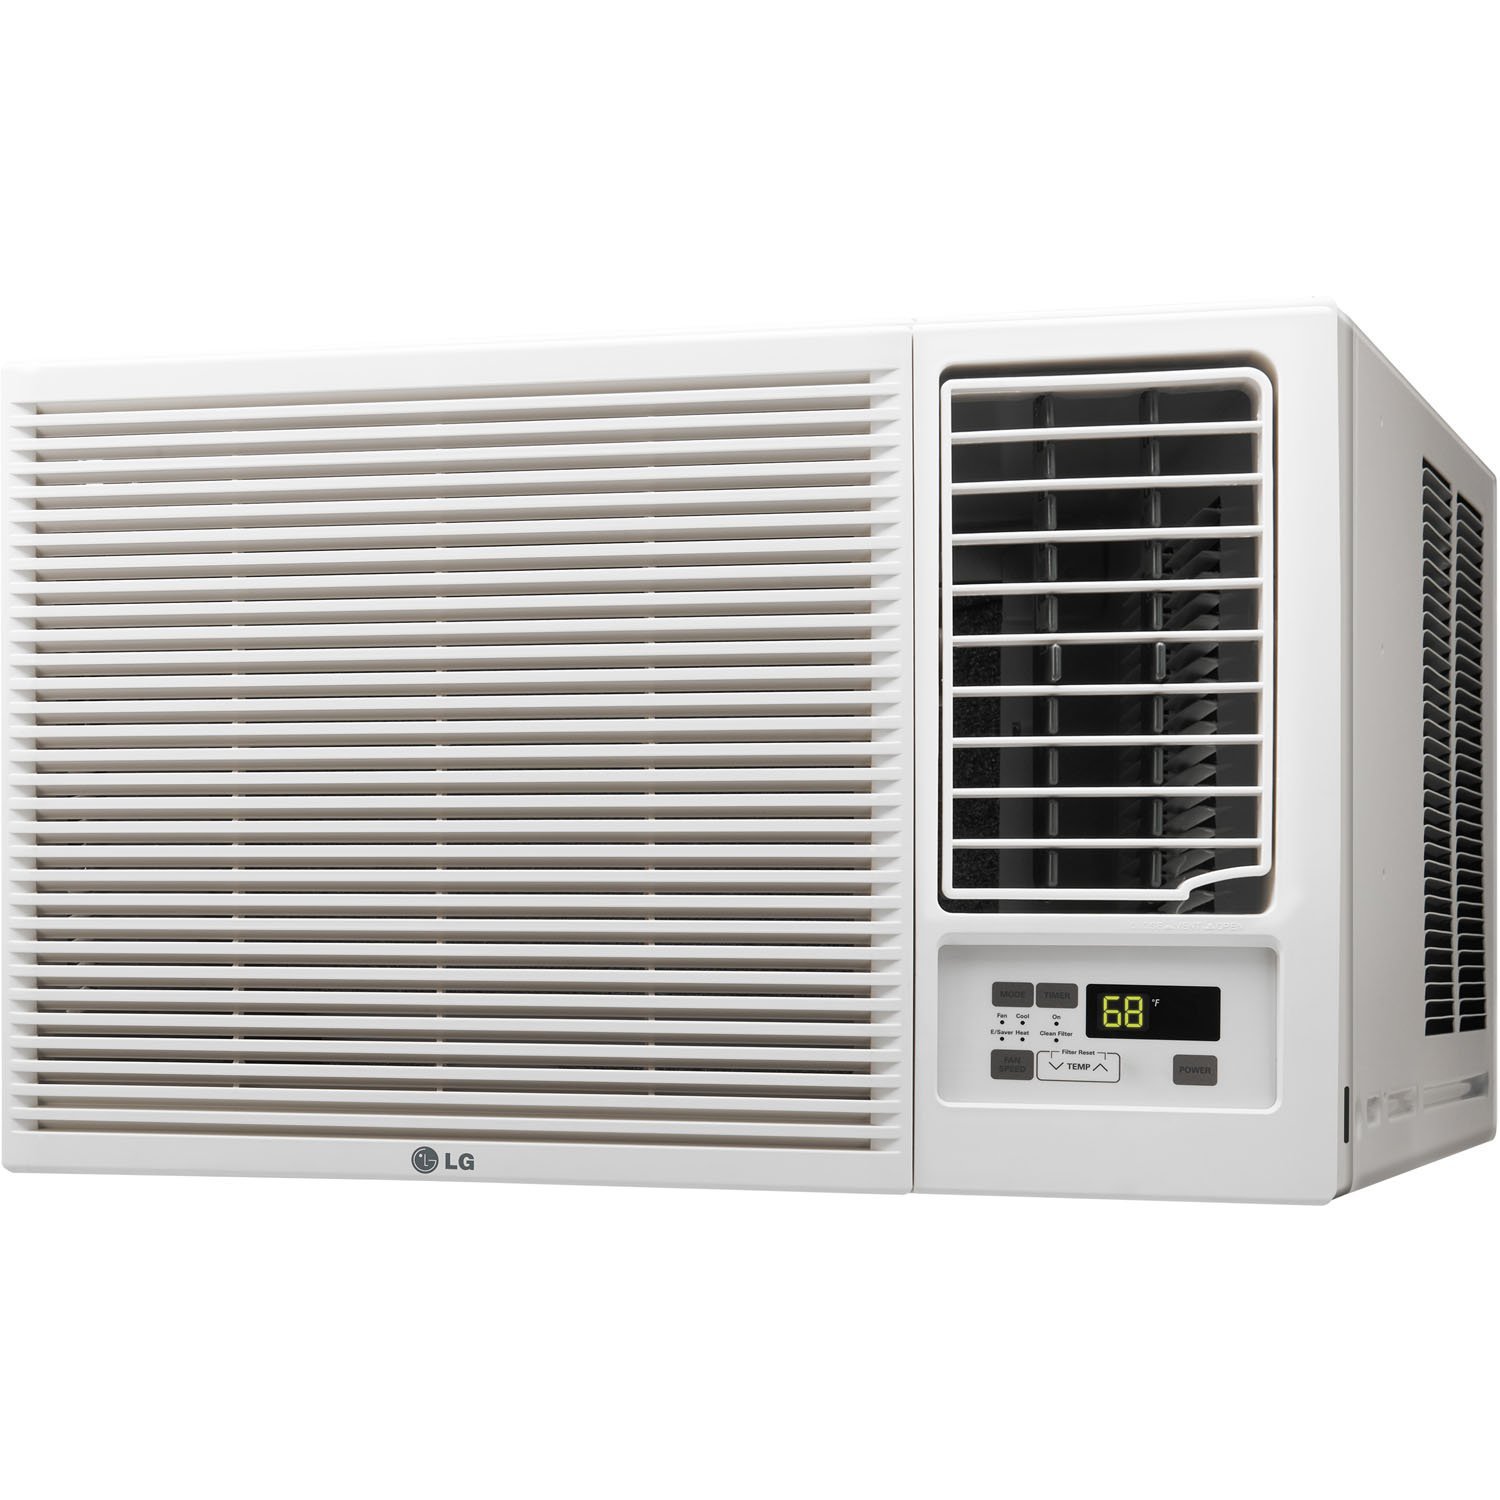 Top 10 Best Window Air Conditioning Units 2017 – Top Value Reviews